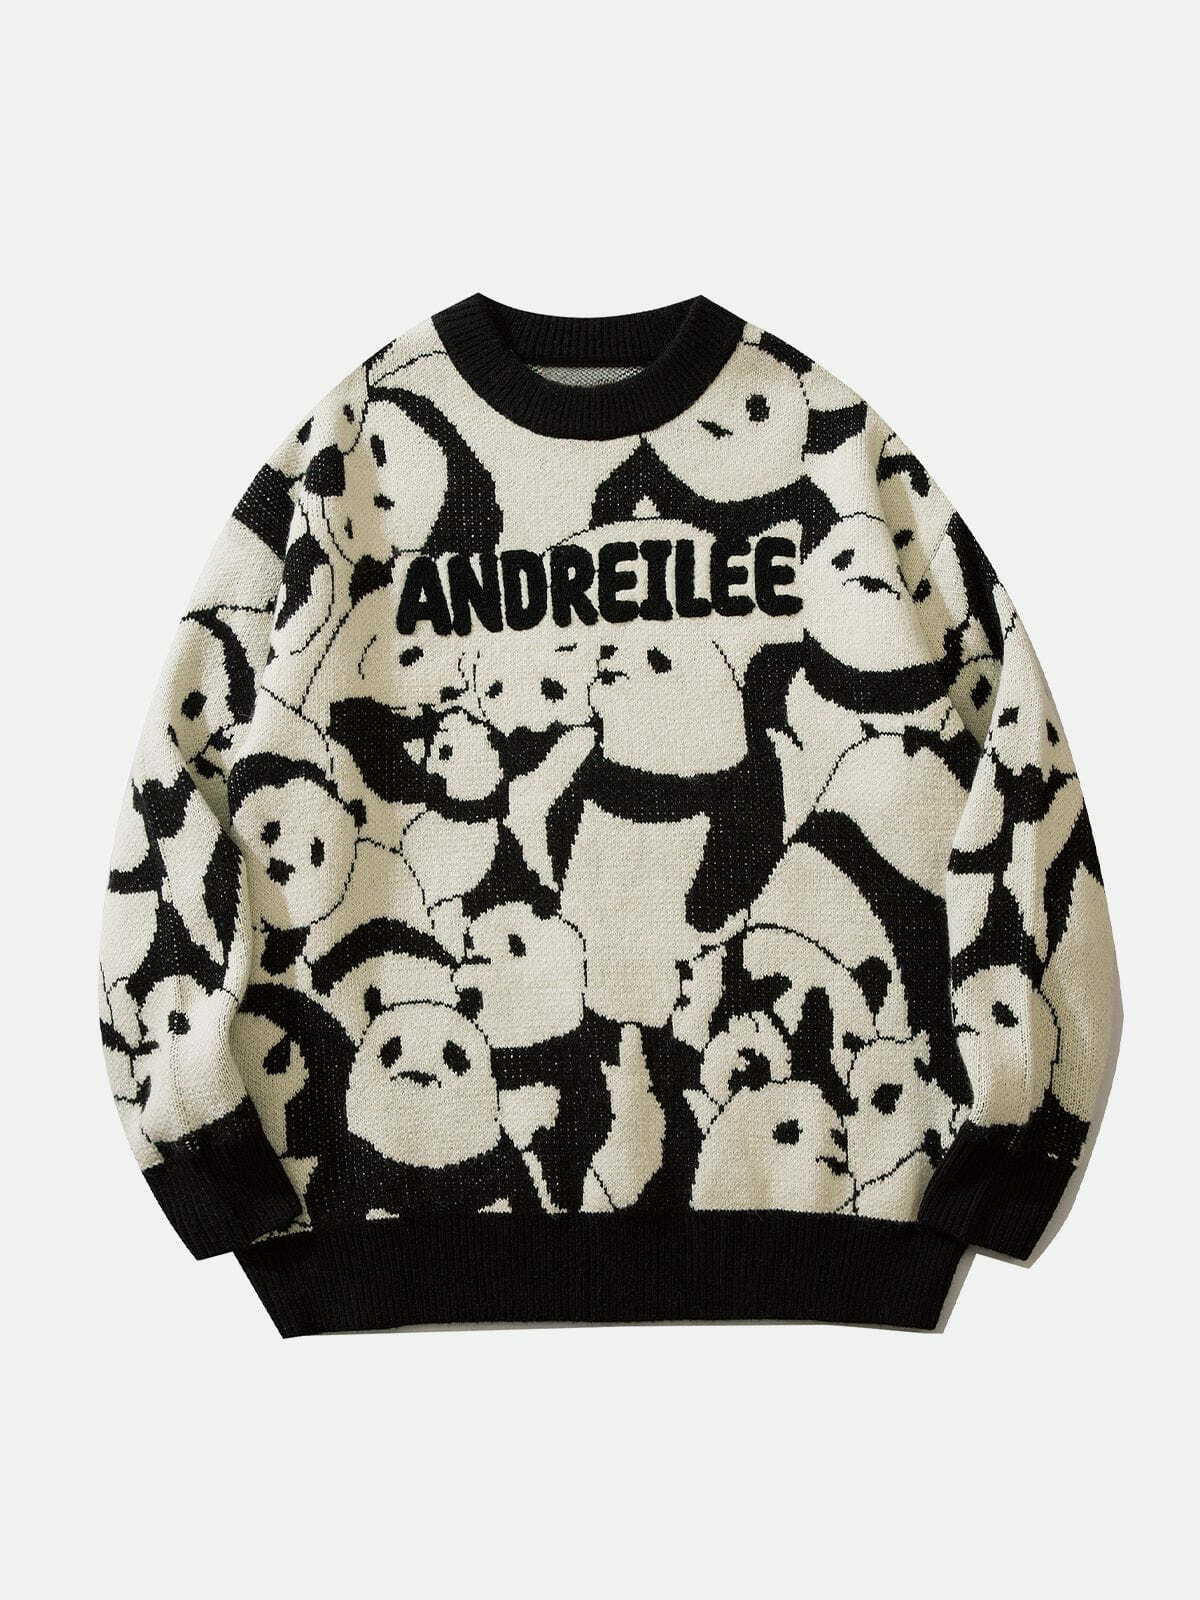 youthful panda graphic sweater quirky & vibrant streetwear 7443